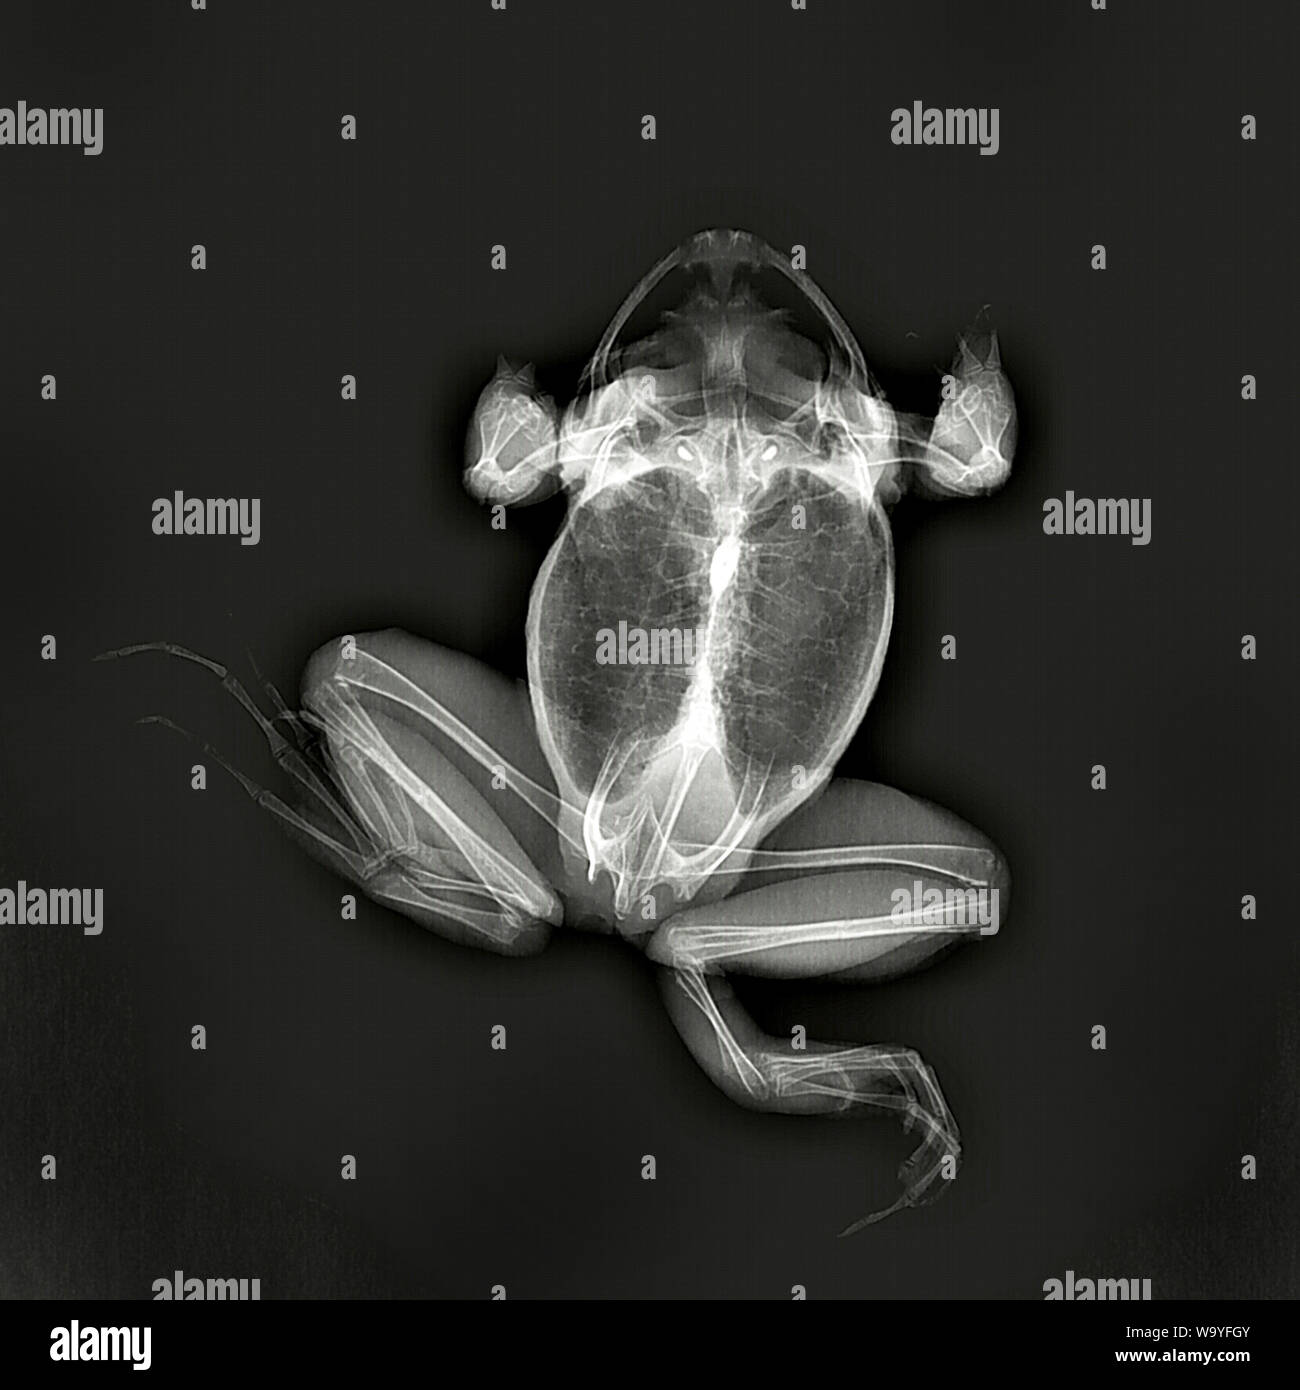 Toad, X-ray, creative perspective, photography, silhouette Stock Photo